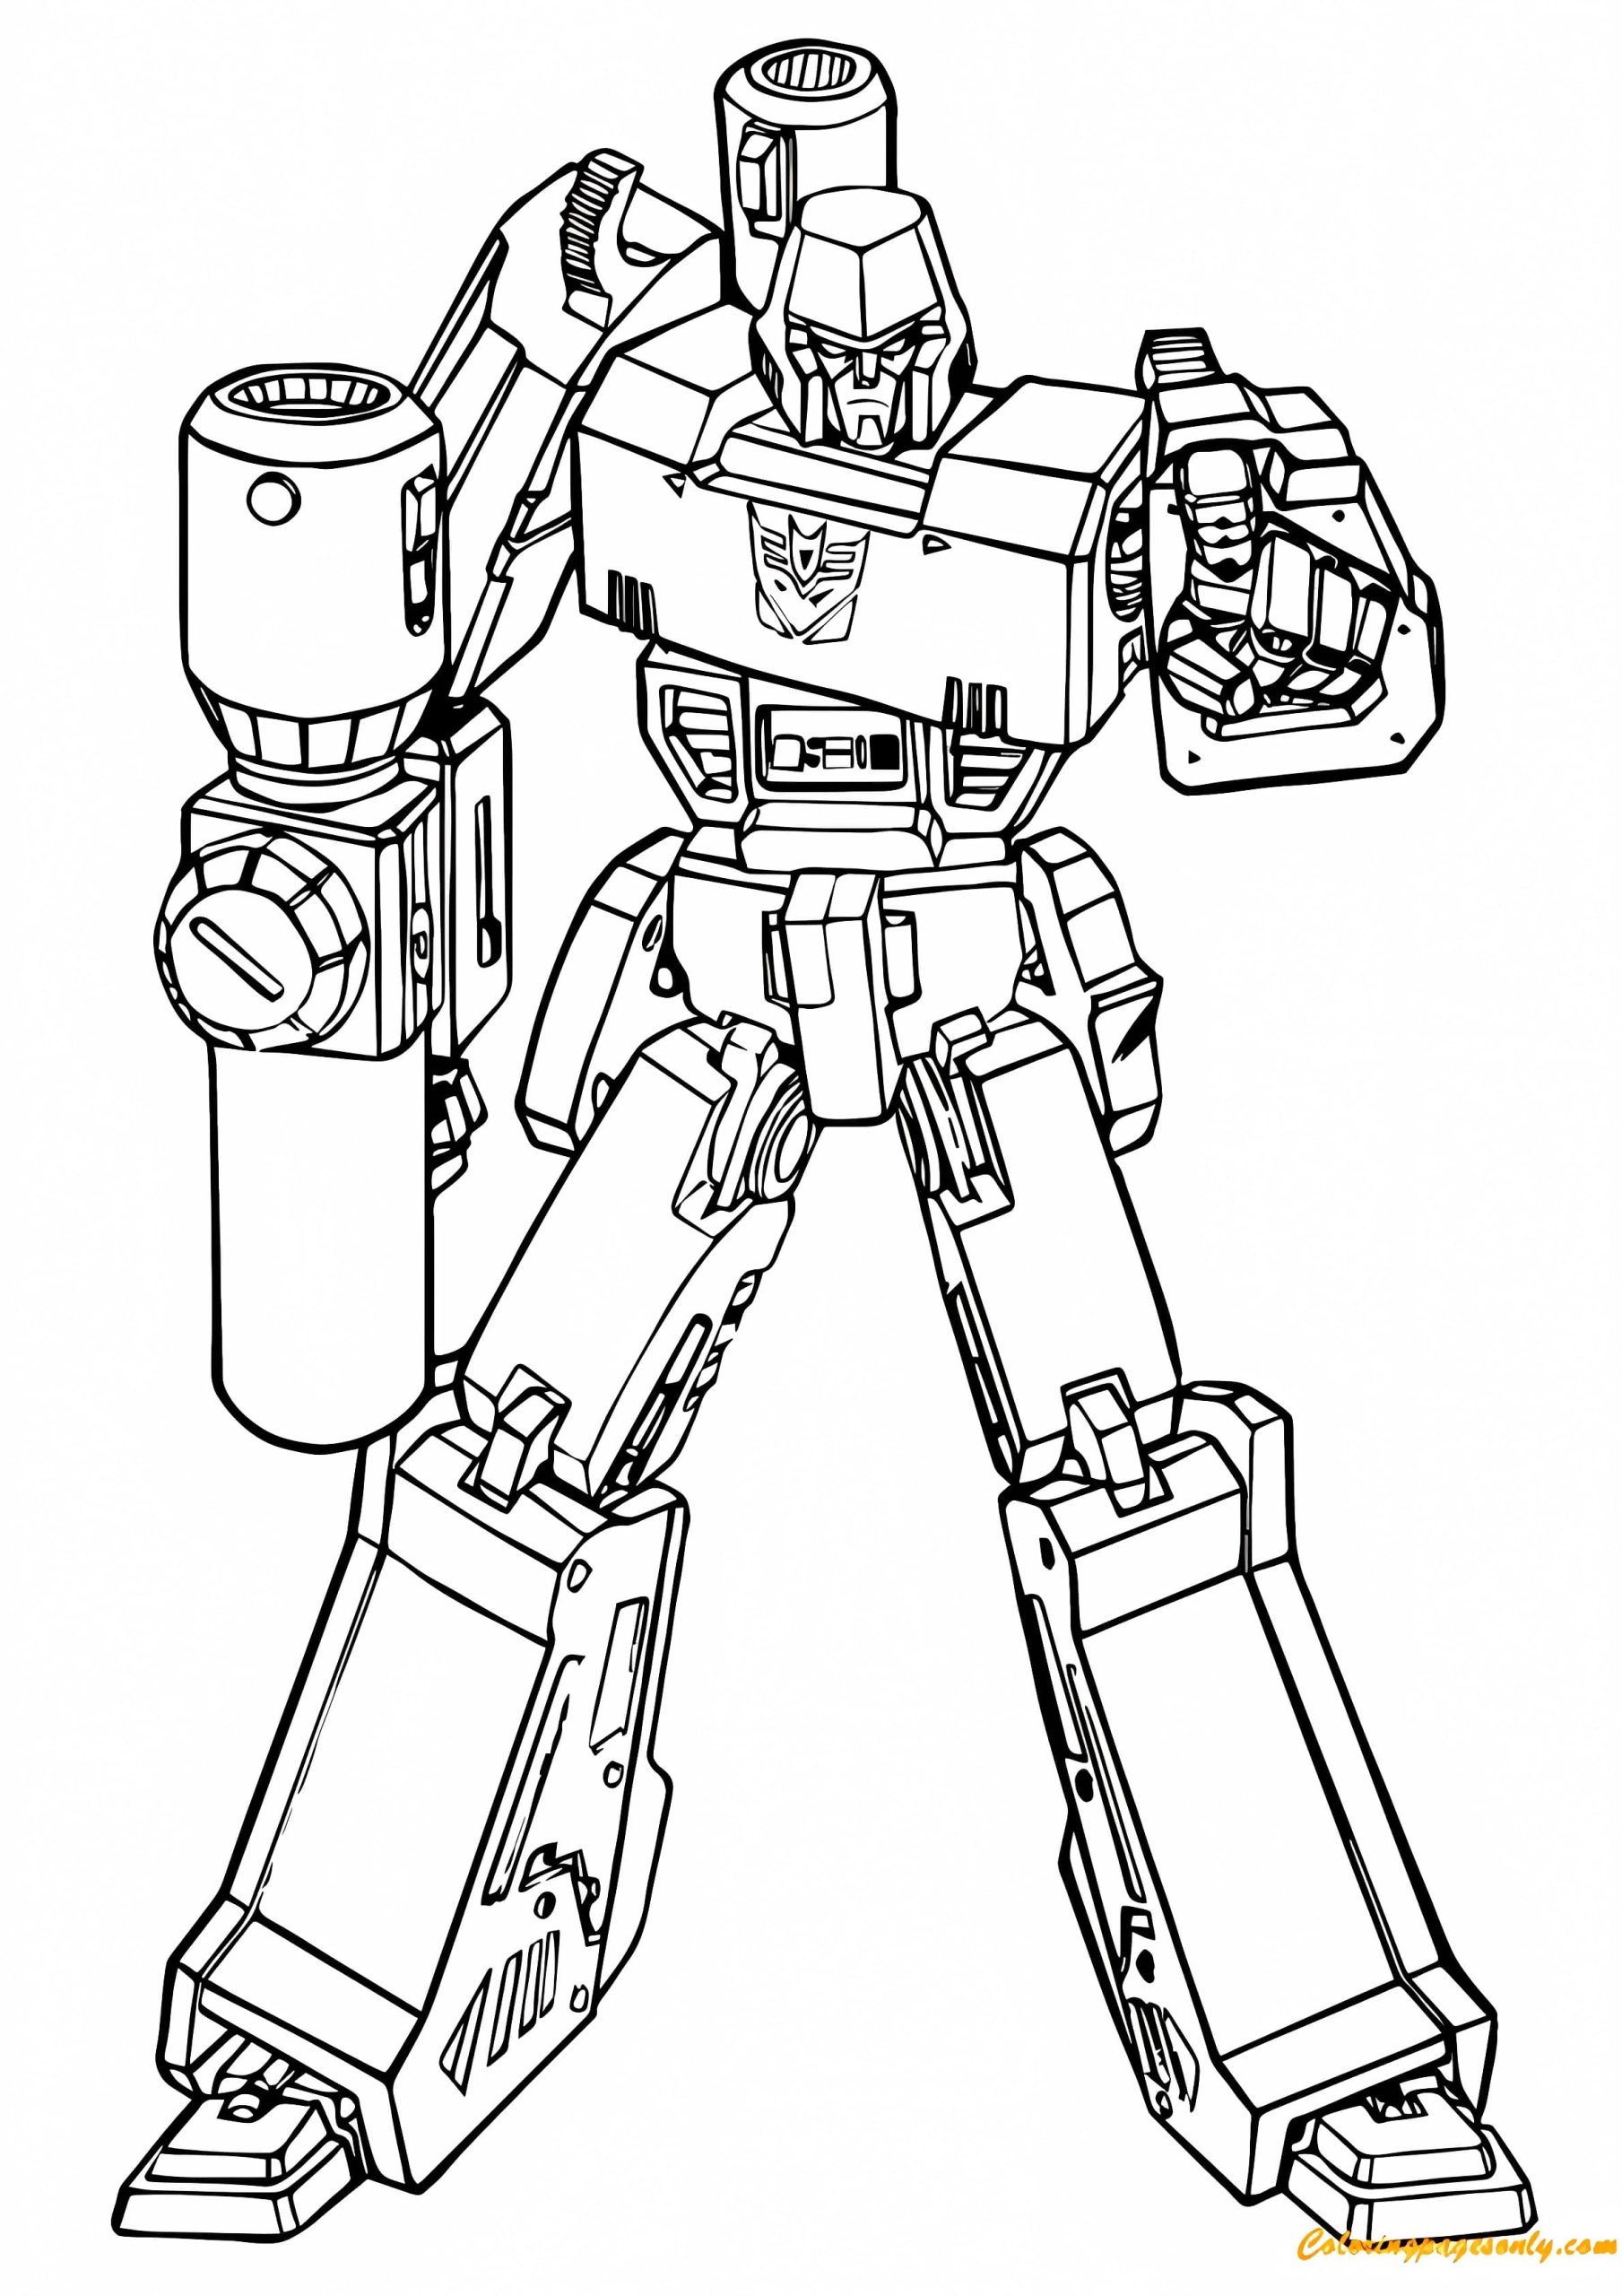 Transformer Putting Down The Gun Coloring Page